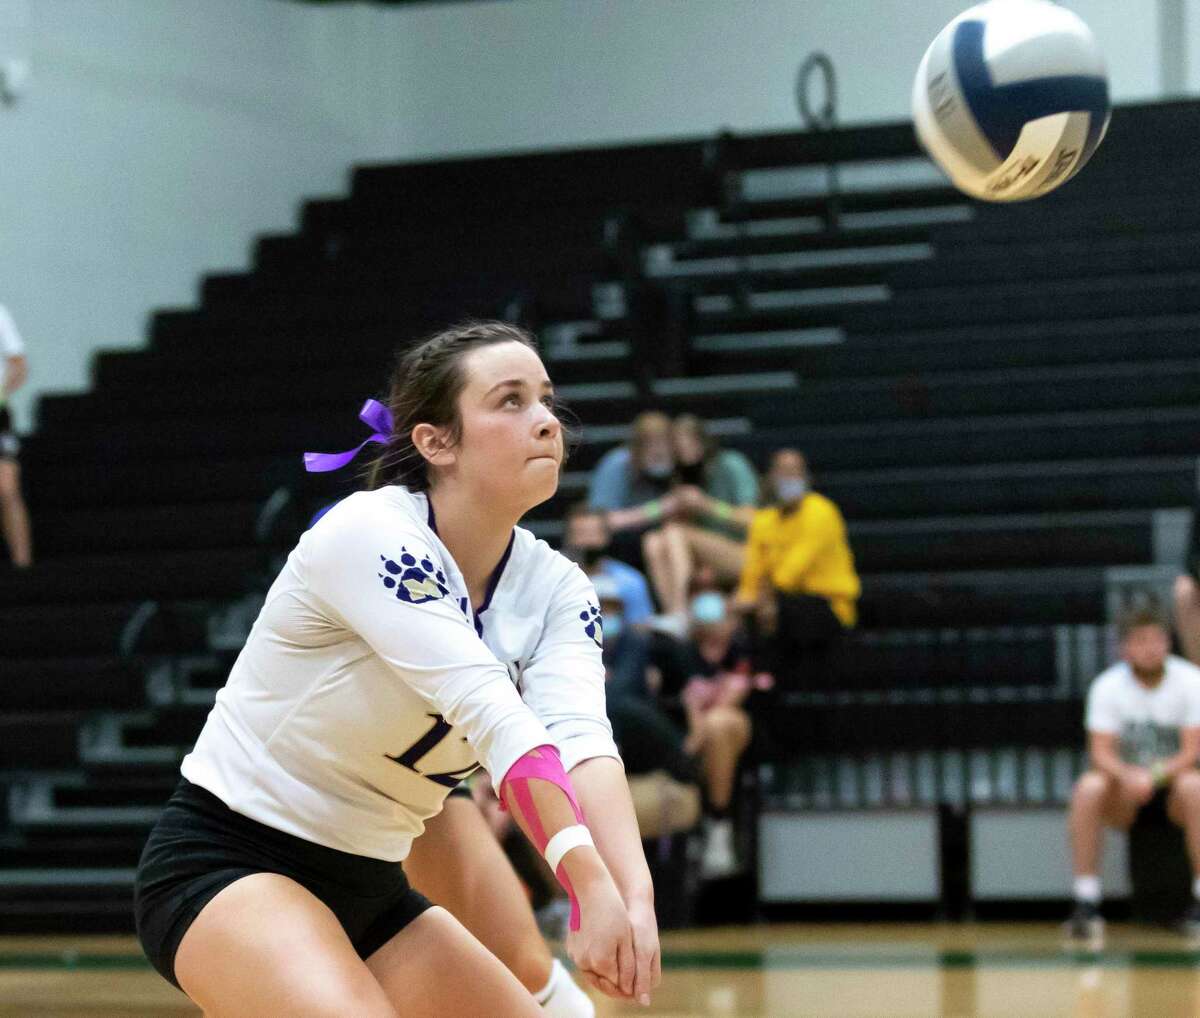 Montgomery libero Kendall Sadler (12) returns a serve during the second set of a District 20-5A volleyball match at Kingwood Park High School in Kingwood.